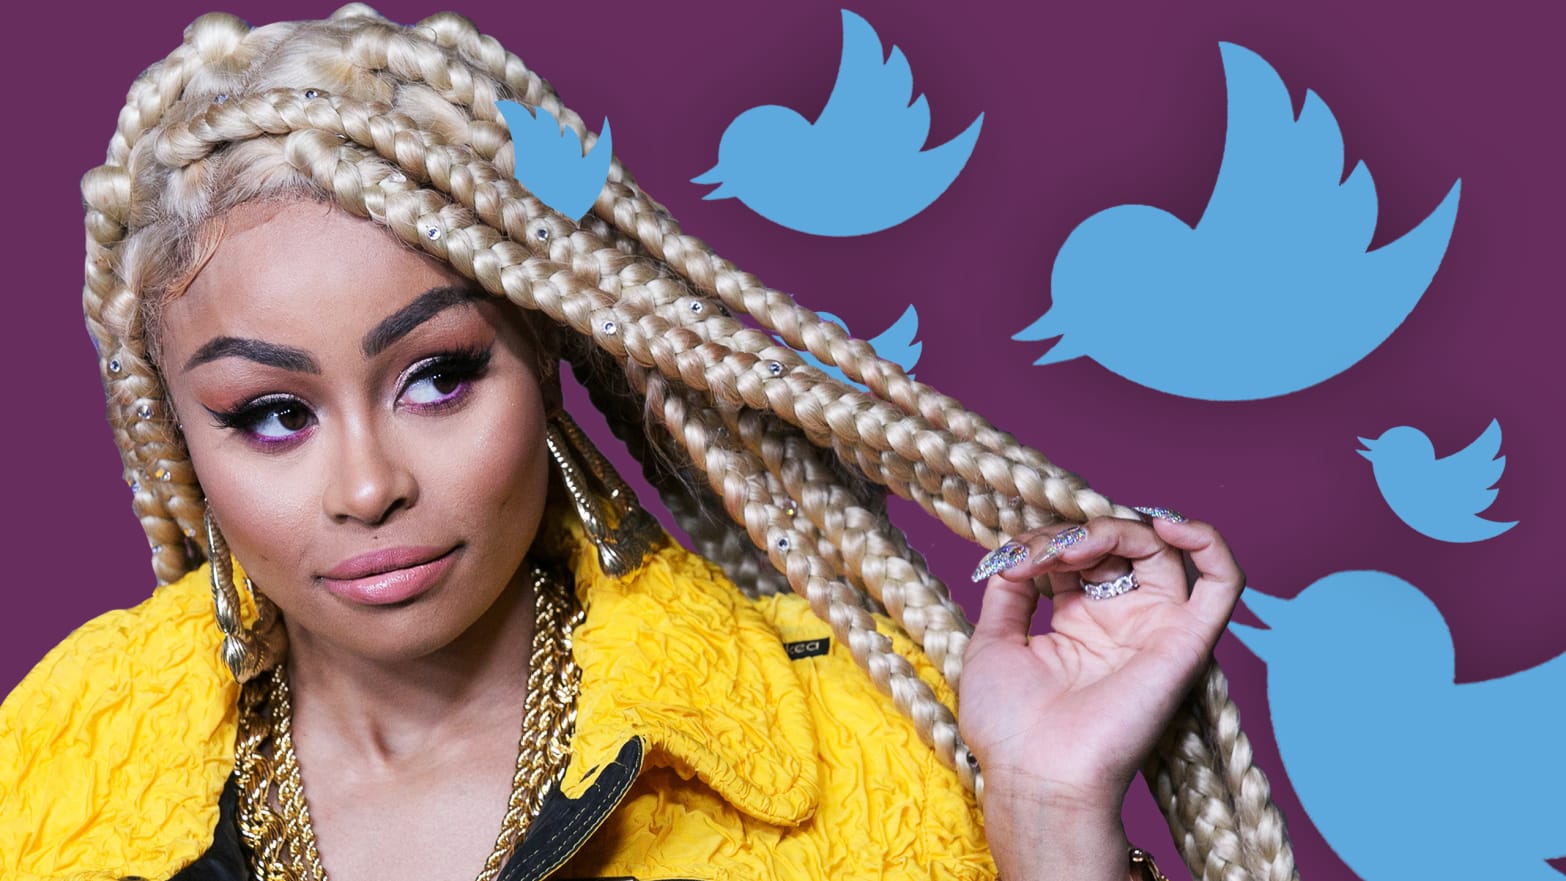 bart lombard recommends blac chyna leaked video pic